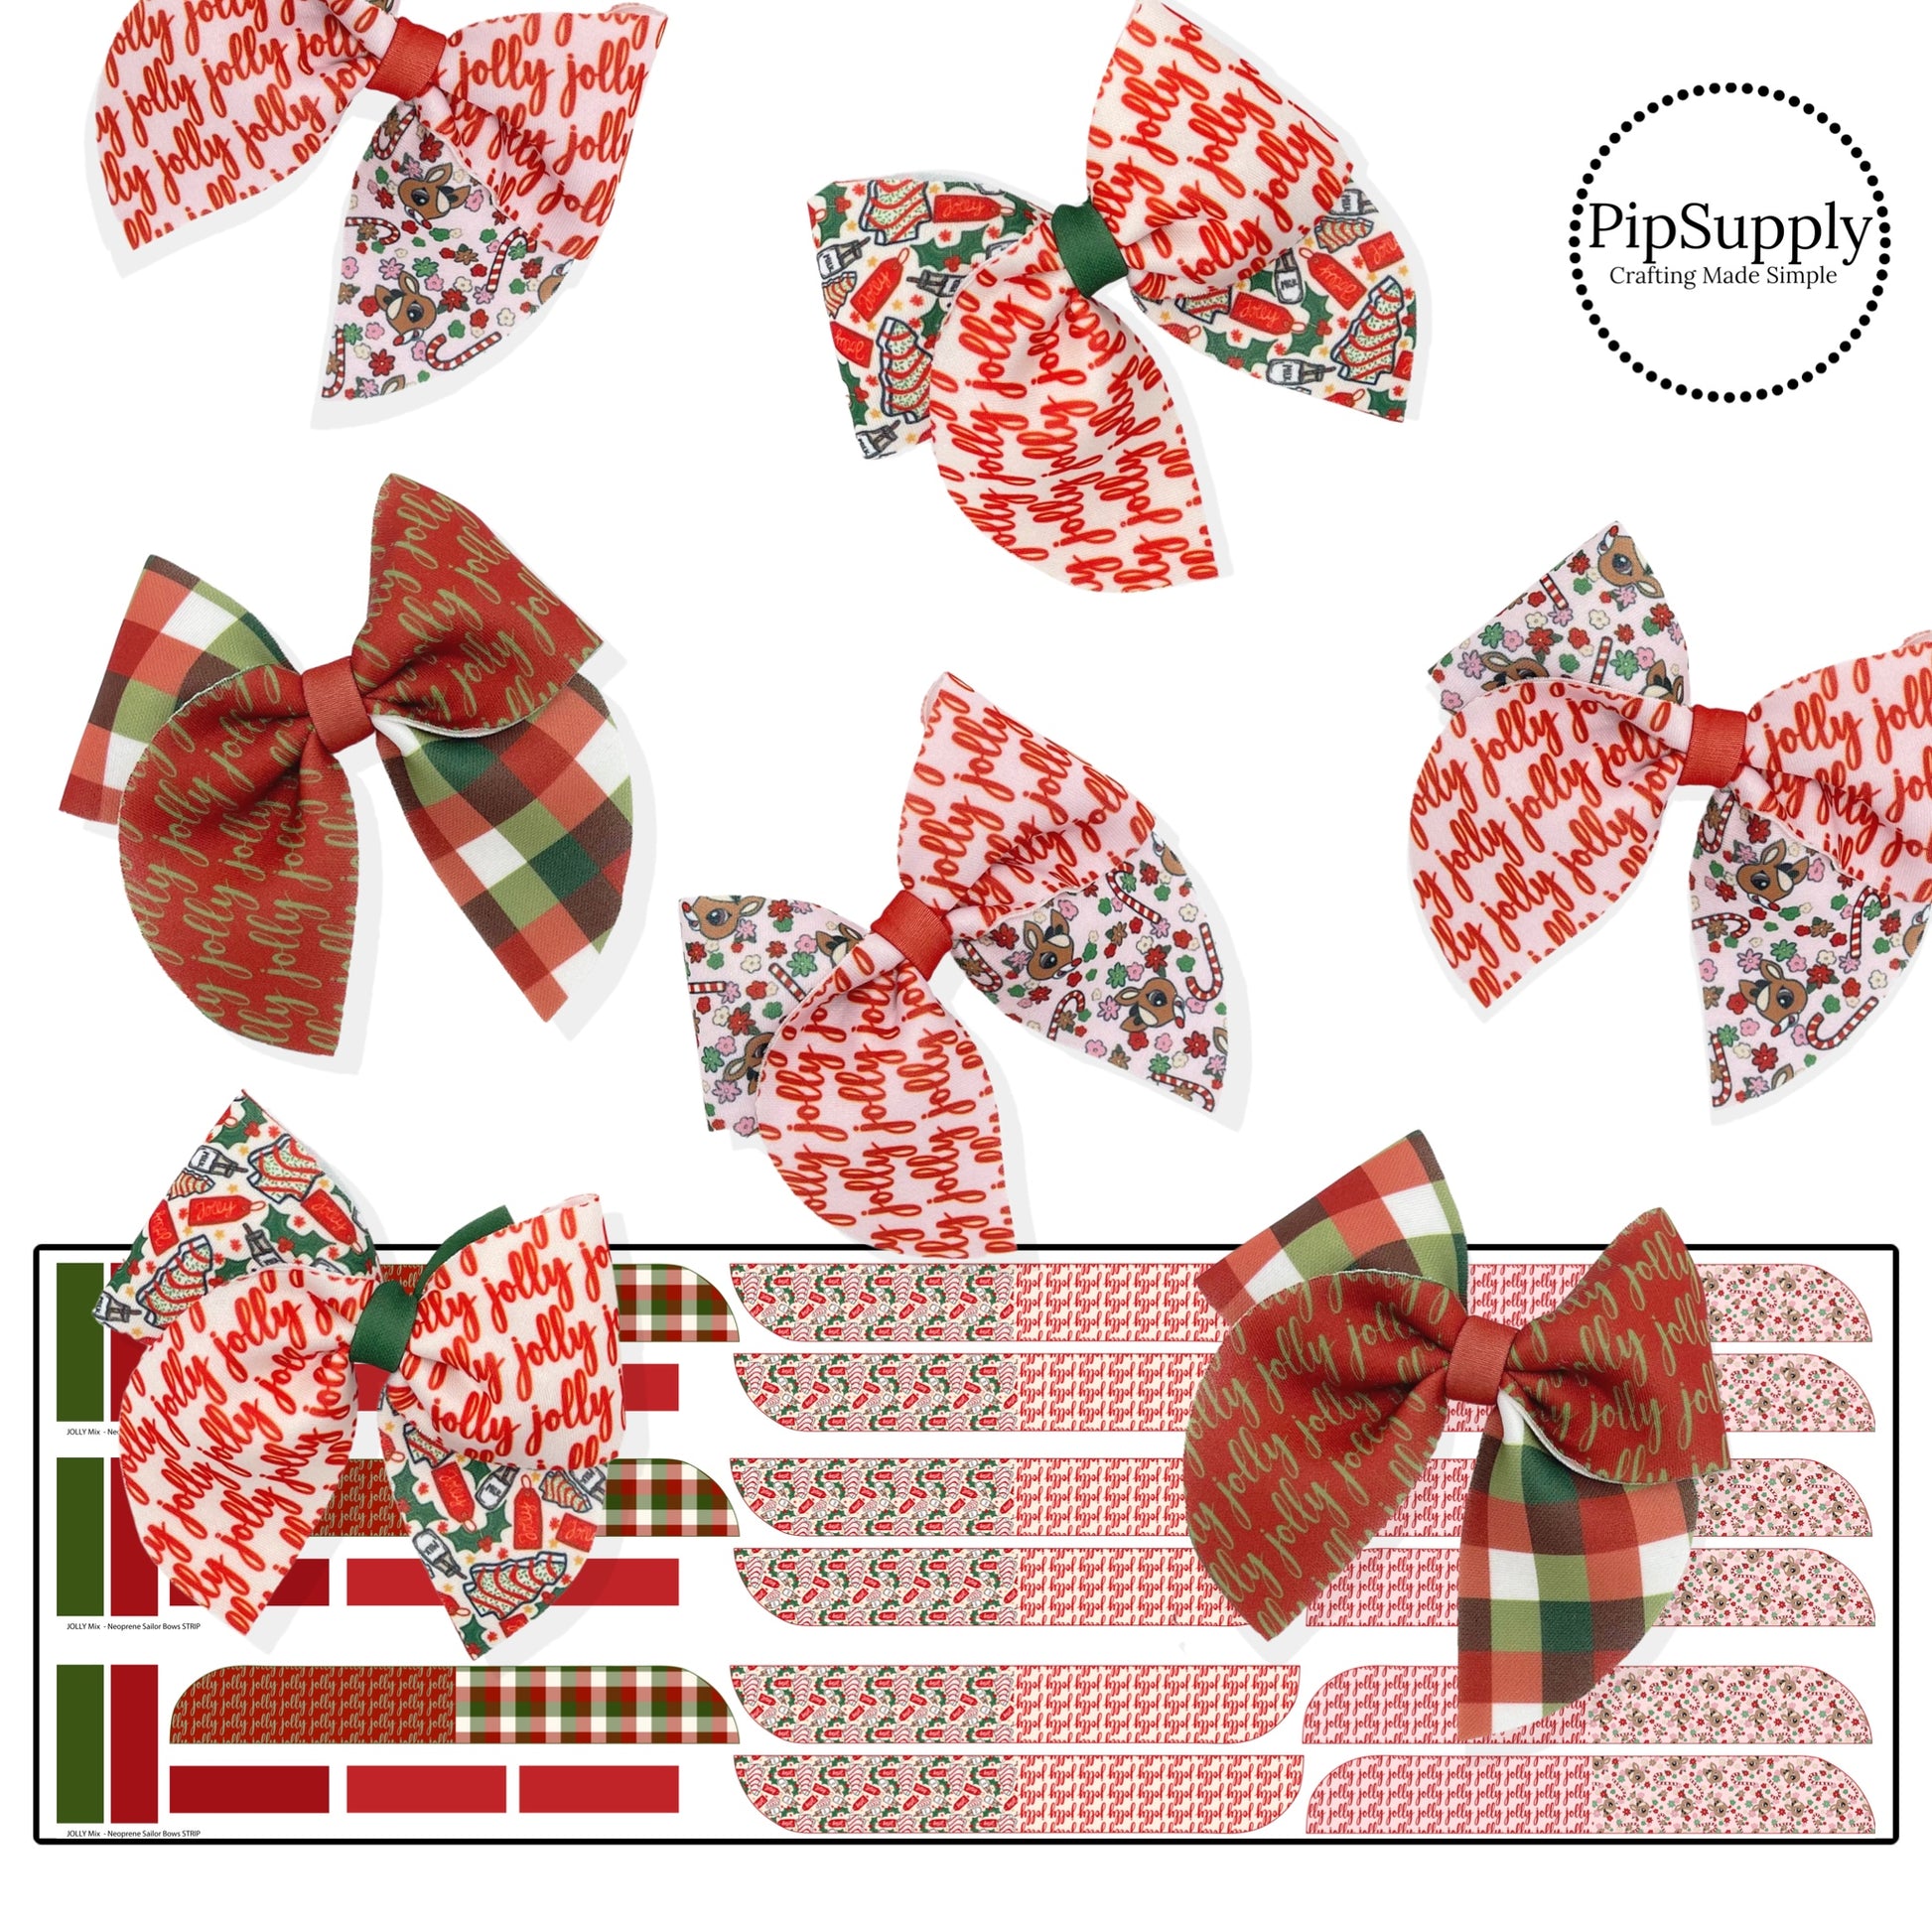 Neoprene sailor bows with reindeers, plaid print, and holiday treats.